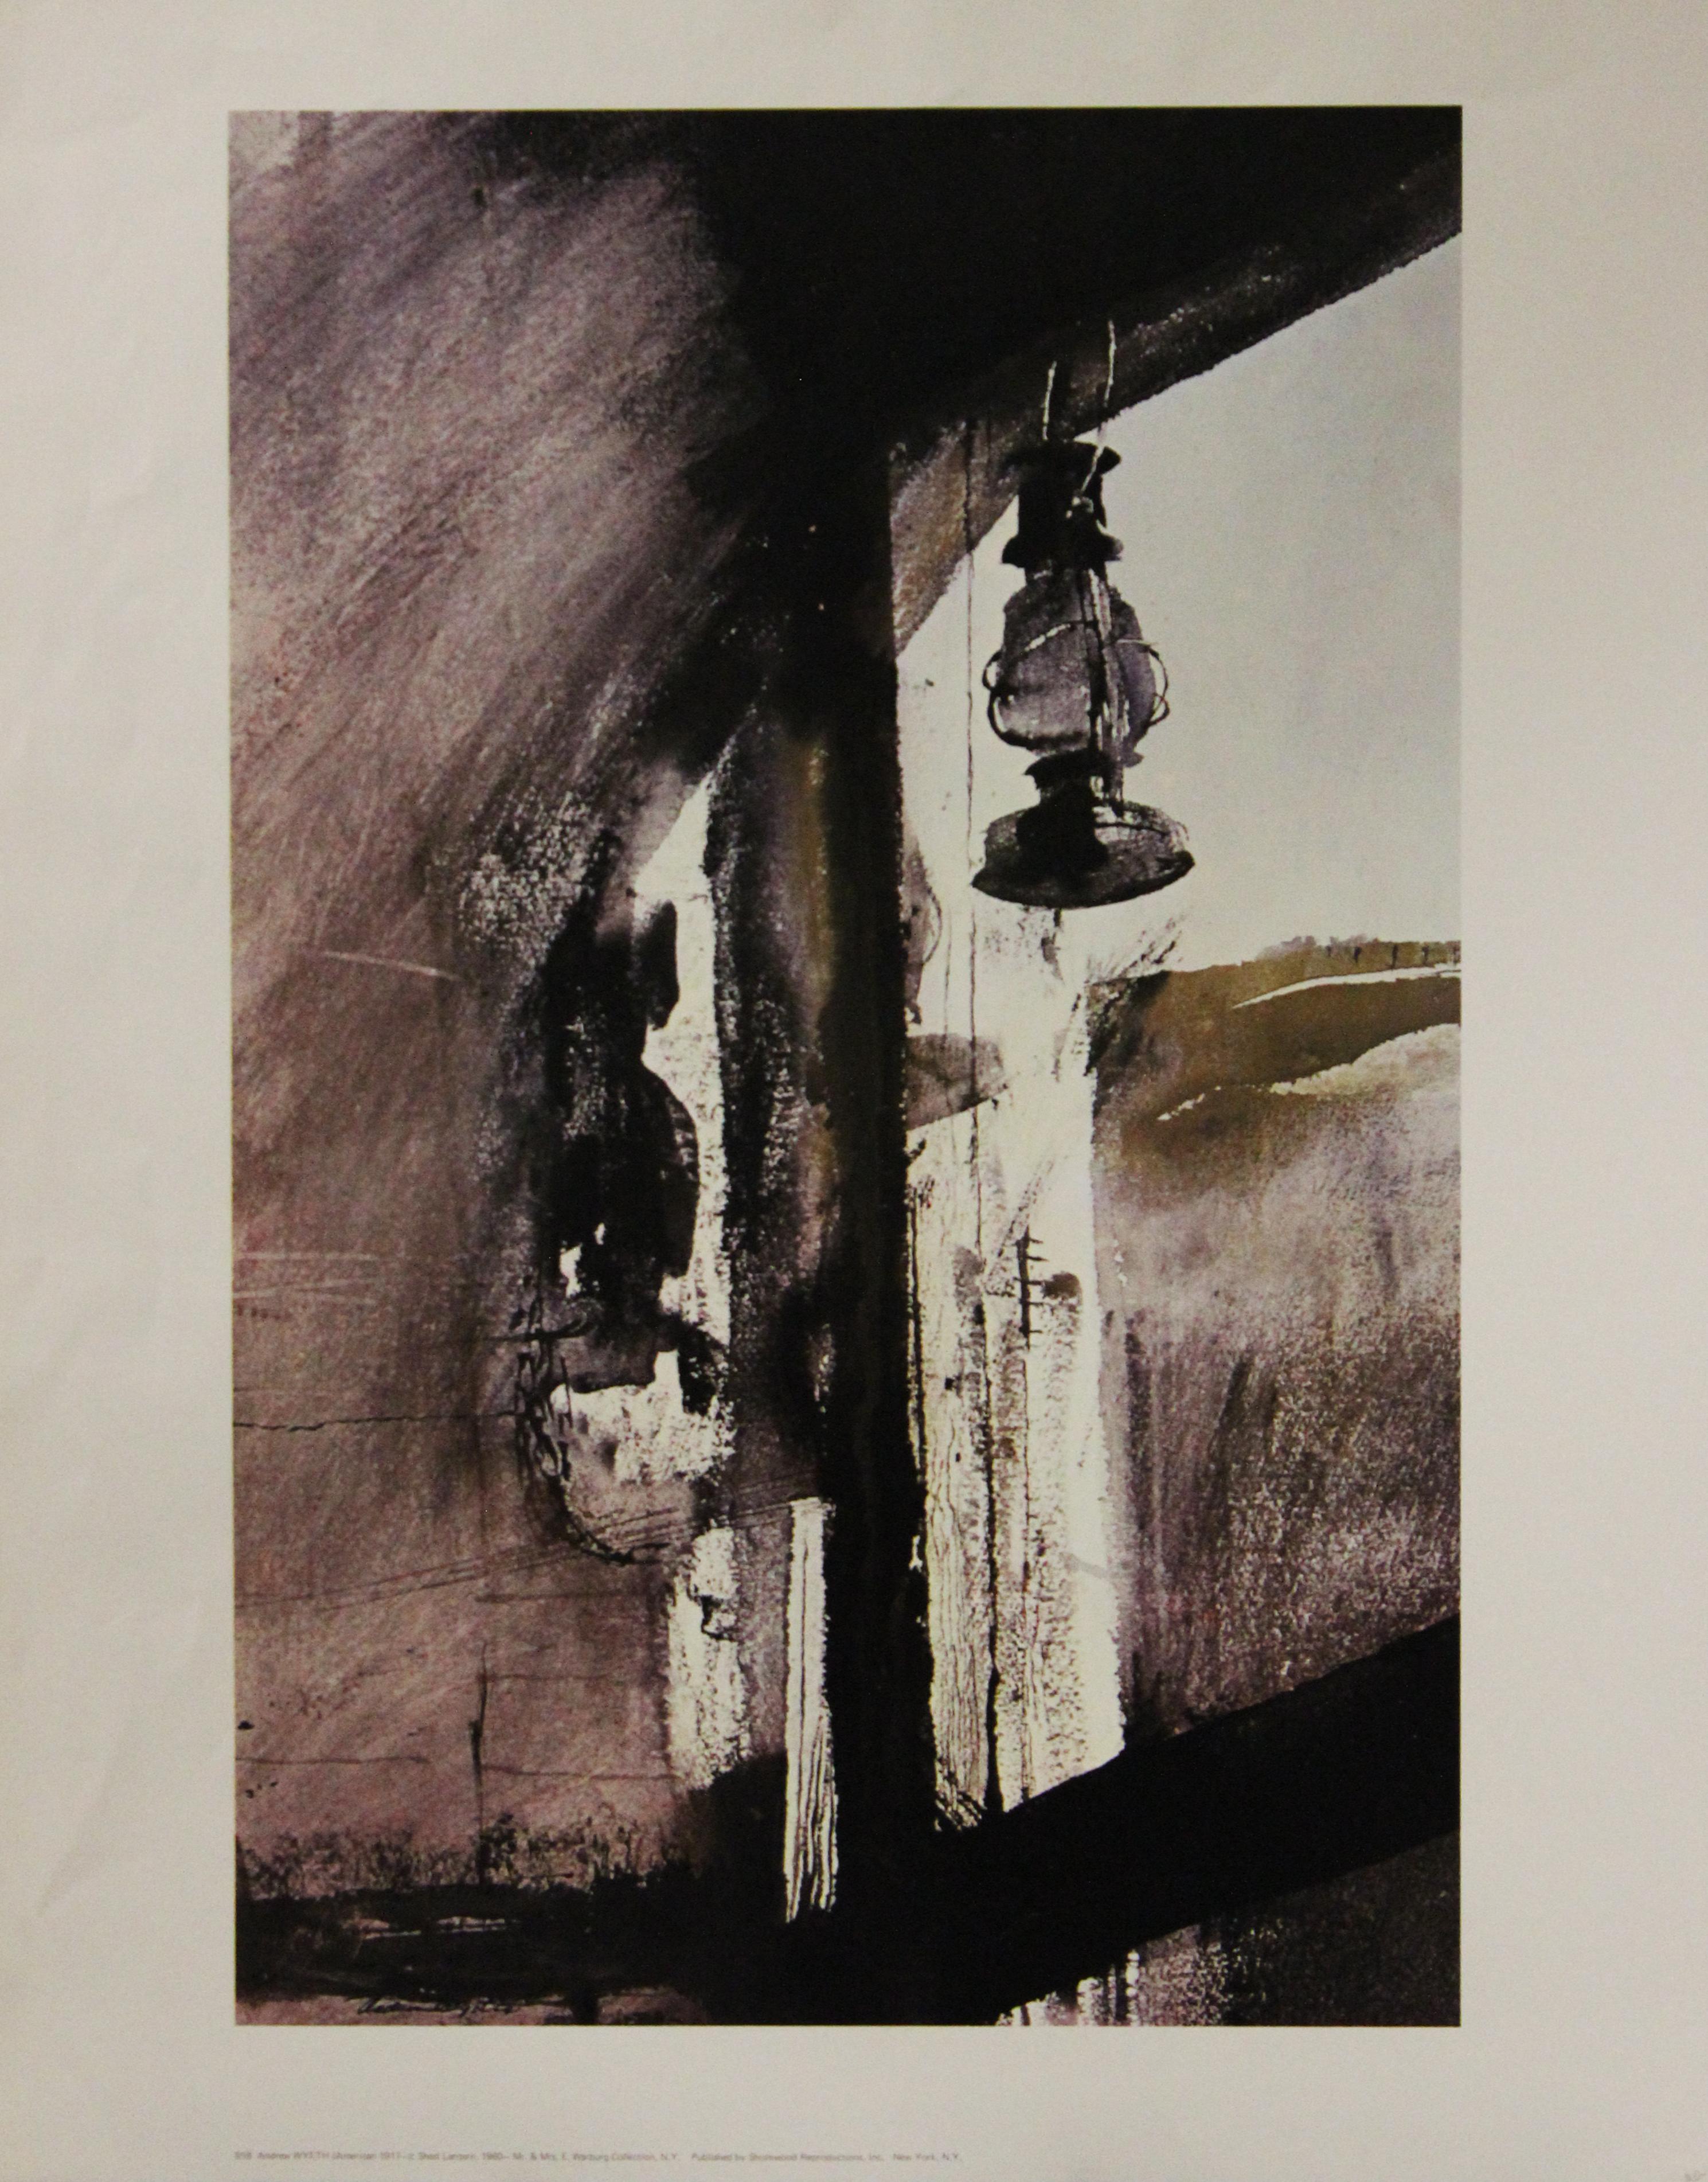 (after) Andrew Wyeth Portrait Print - Shed Lantern-Poster. Published by Shorewood Reproductions, Inc.